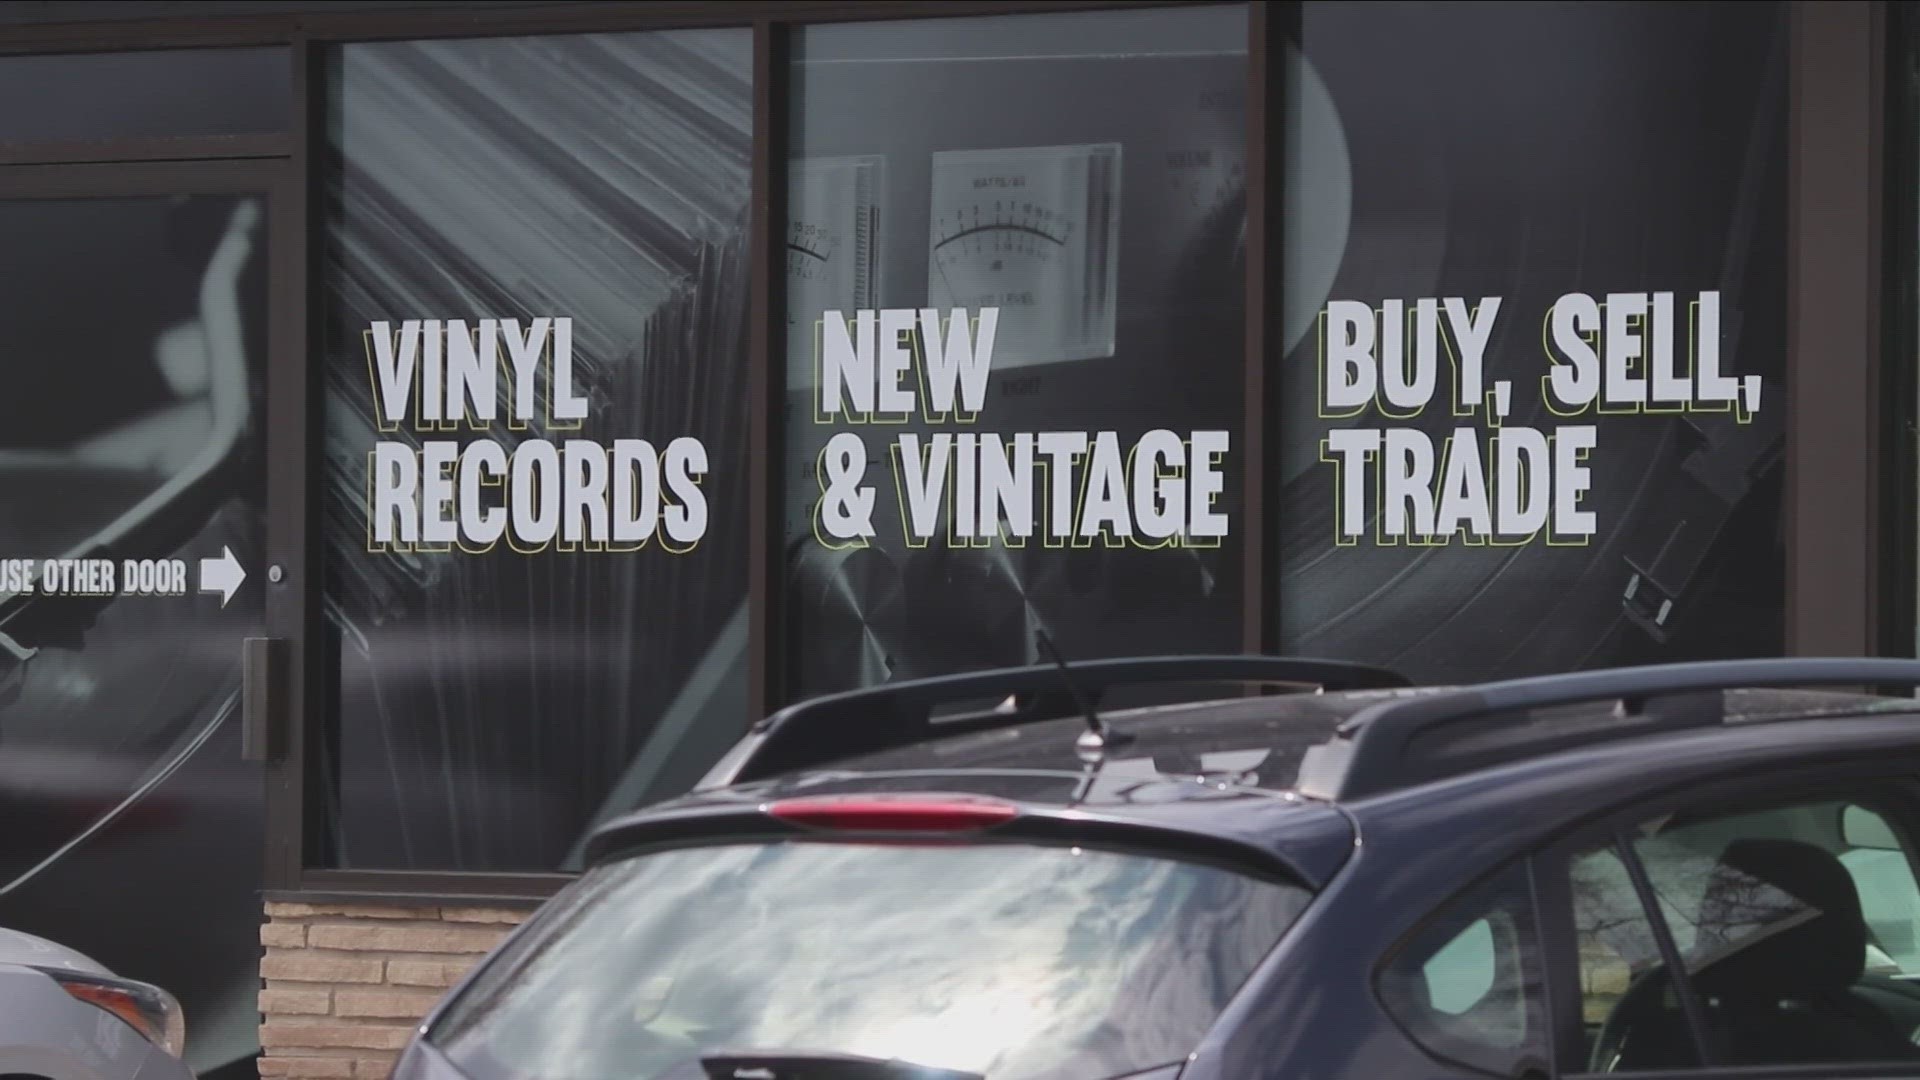 Record Store Day has been known through the years for special vinyl and CD releases and promotional products.